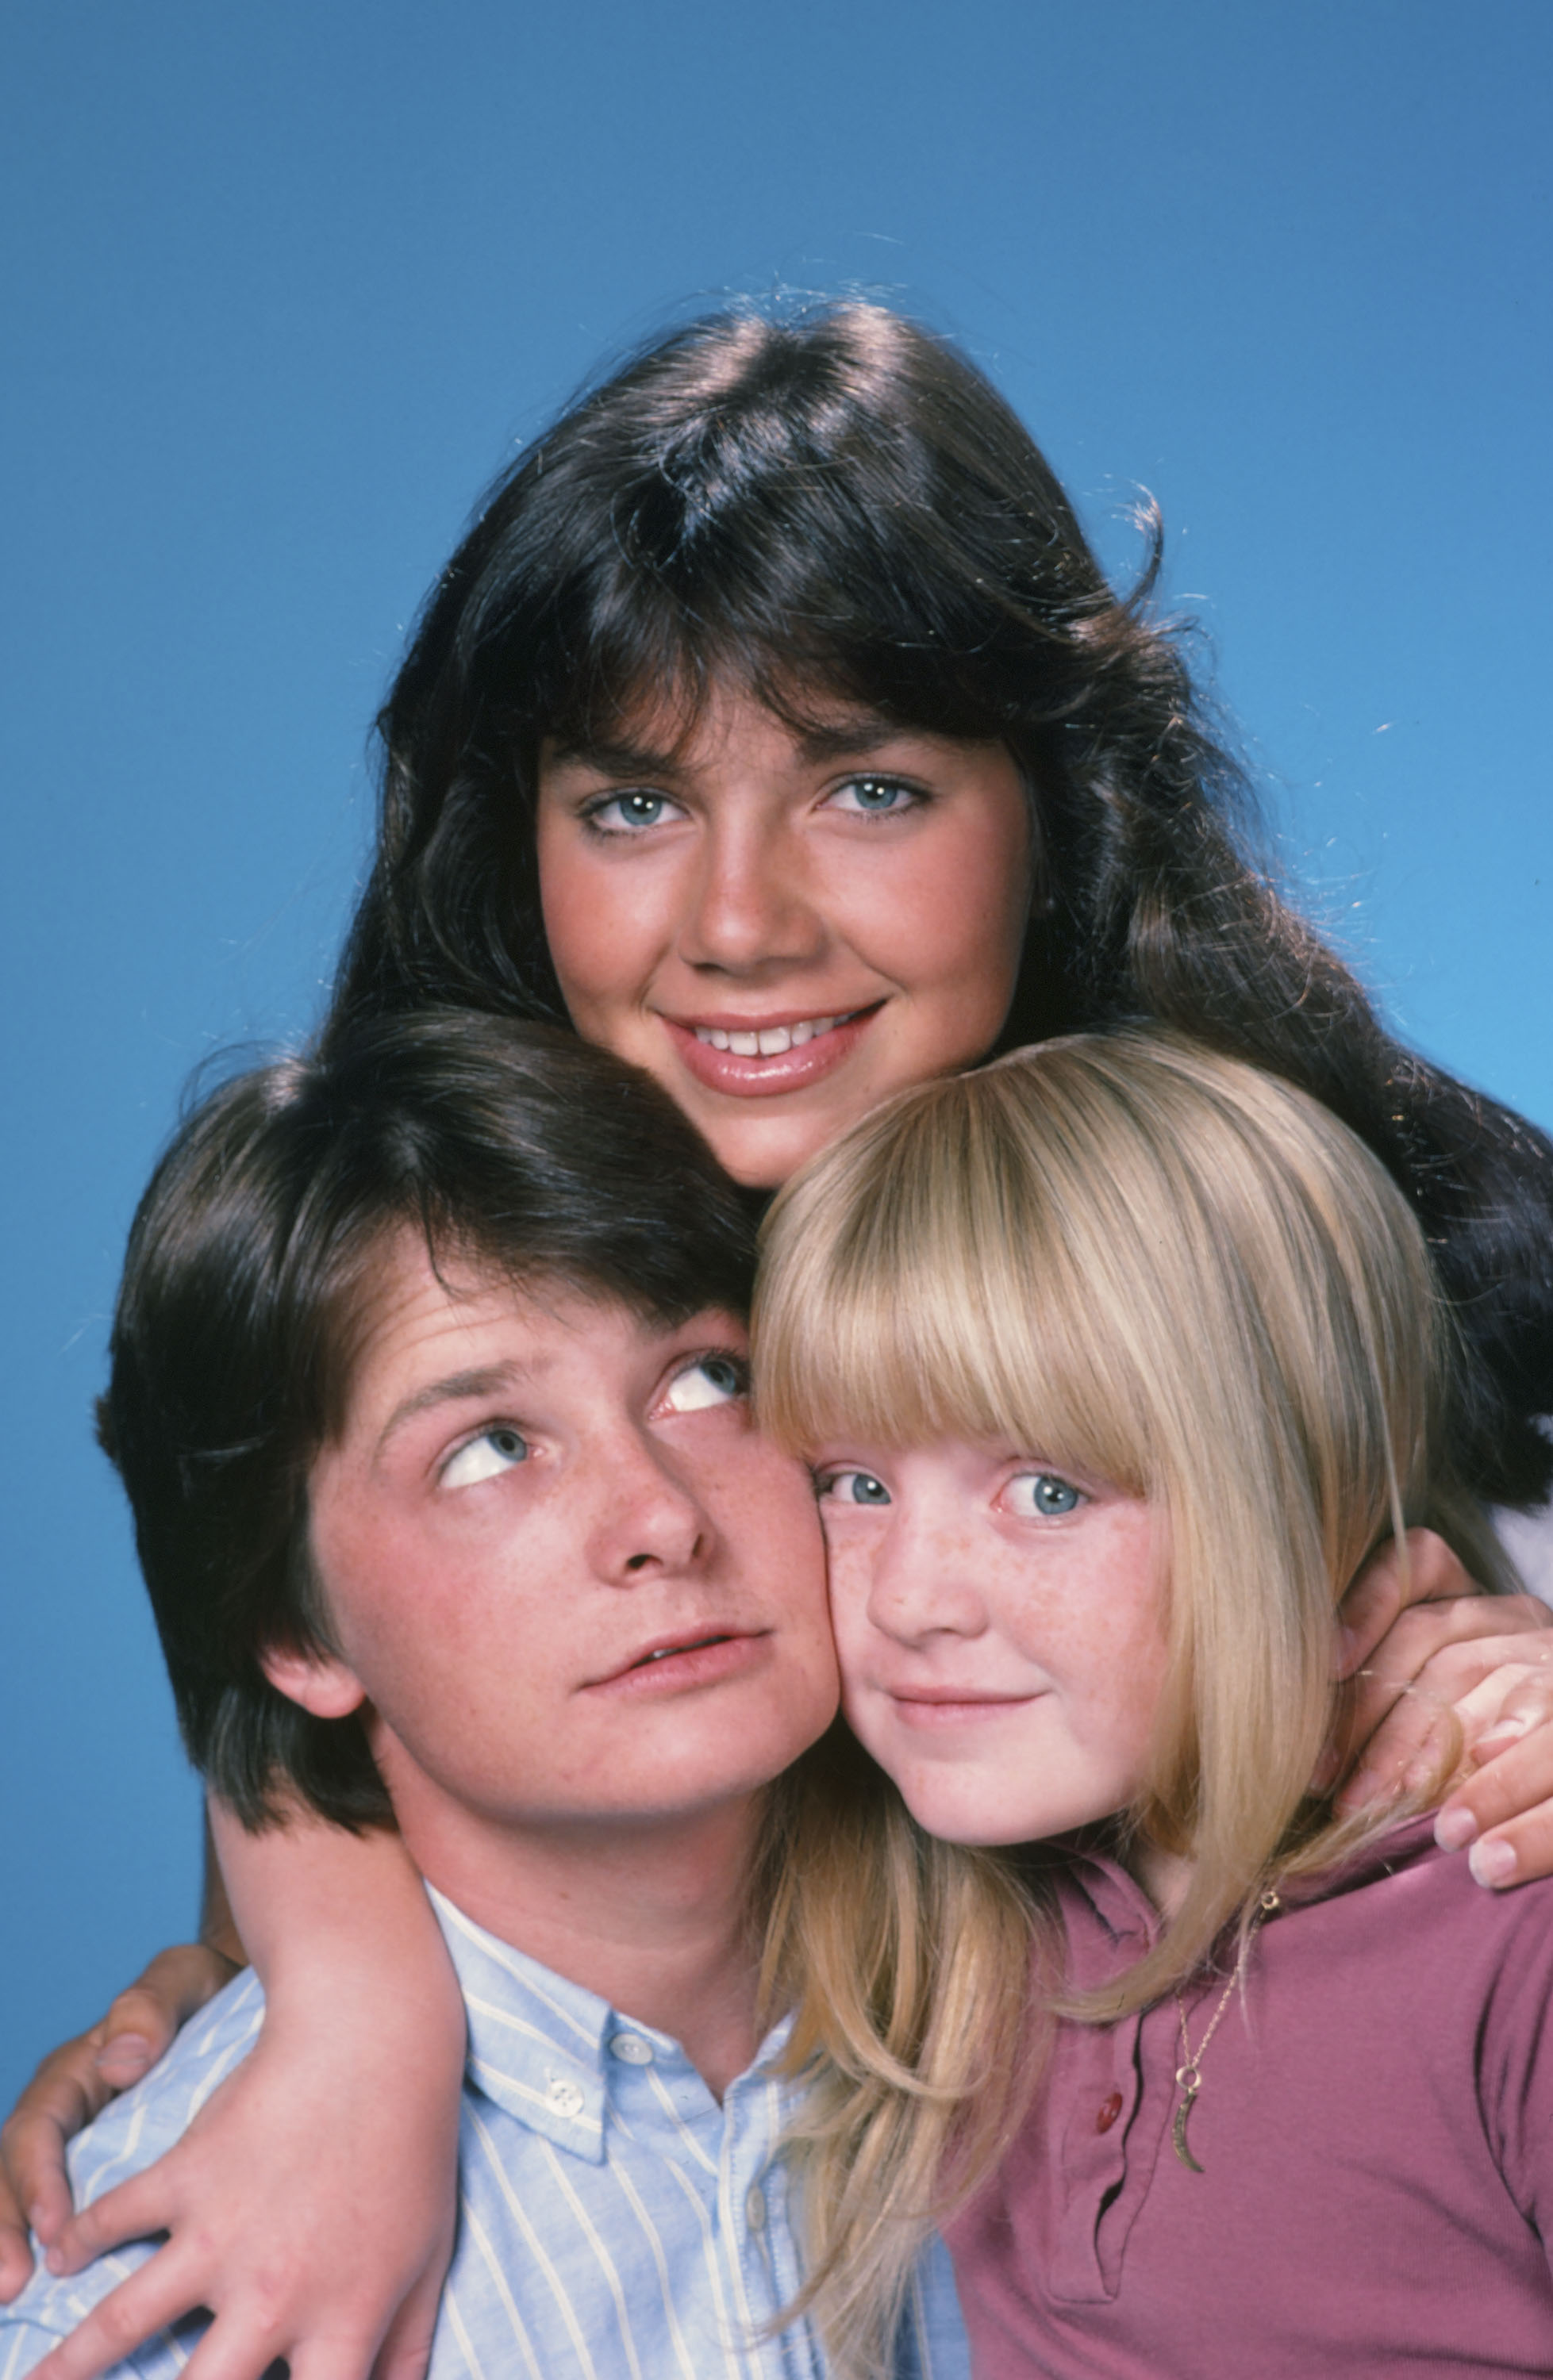 Michael J. Fox, Justine Bateman, and Tina Yothers in "Family Ties," circa 1980s | Source: Getty Images